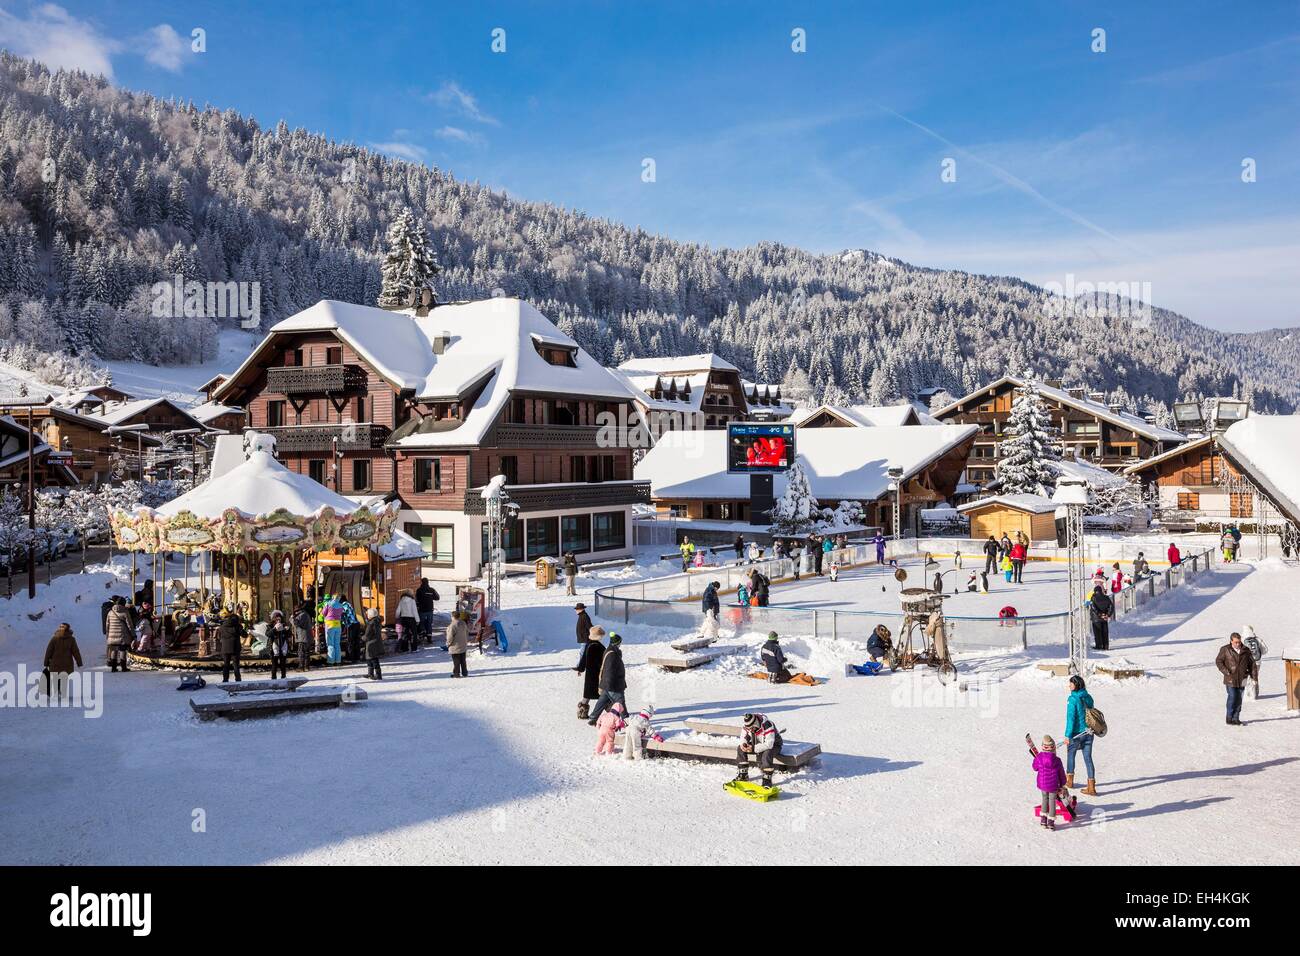 France, Haute-Savoie, Morzine, the valley of Aulps, ski slopes of the Portes du Soleil, ice rink and merry-go-round place of Baraty Stock Photo